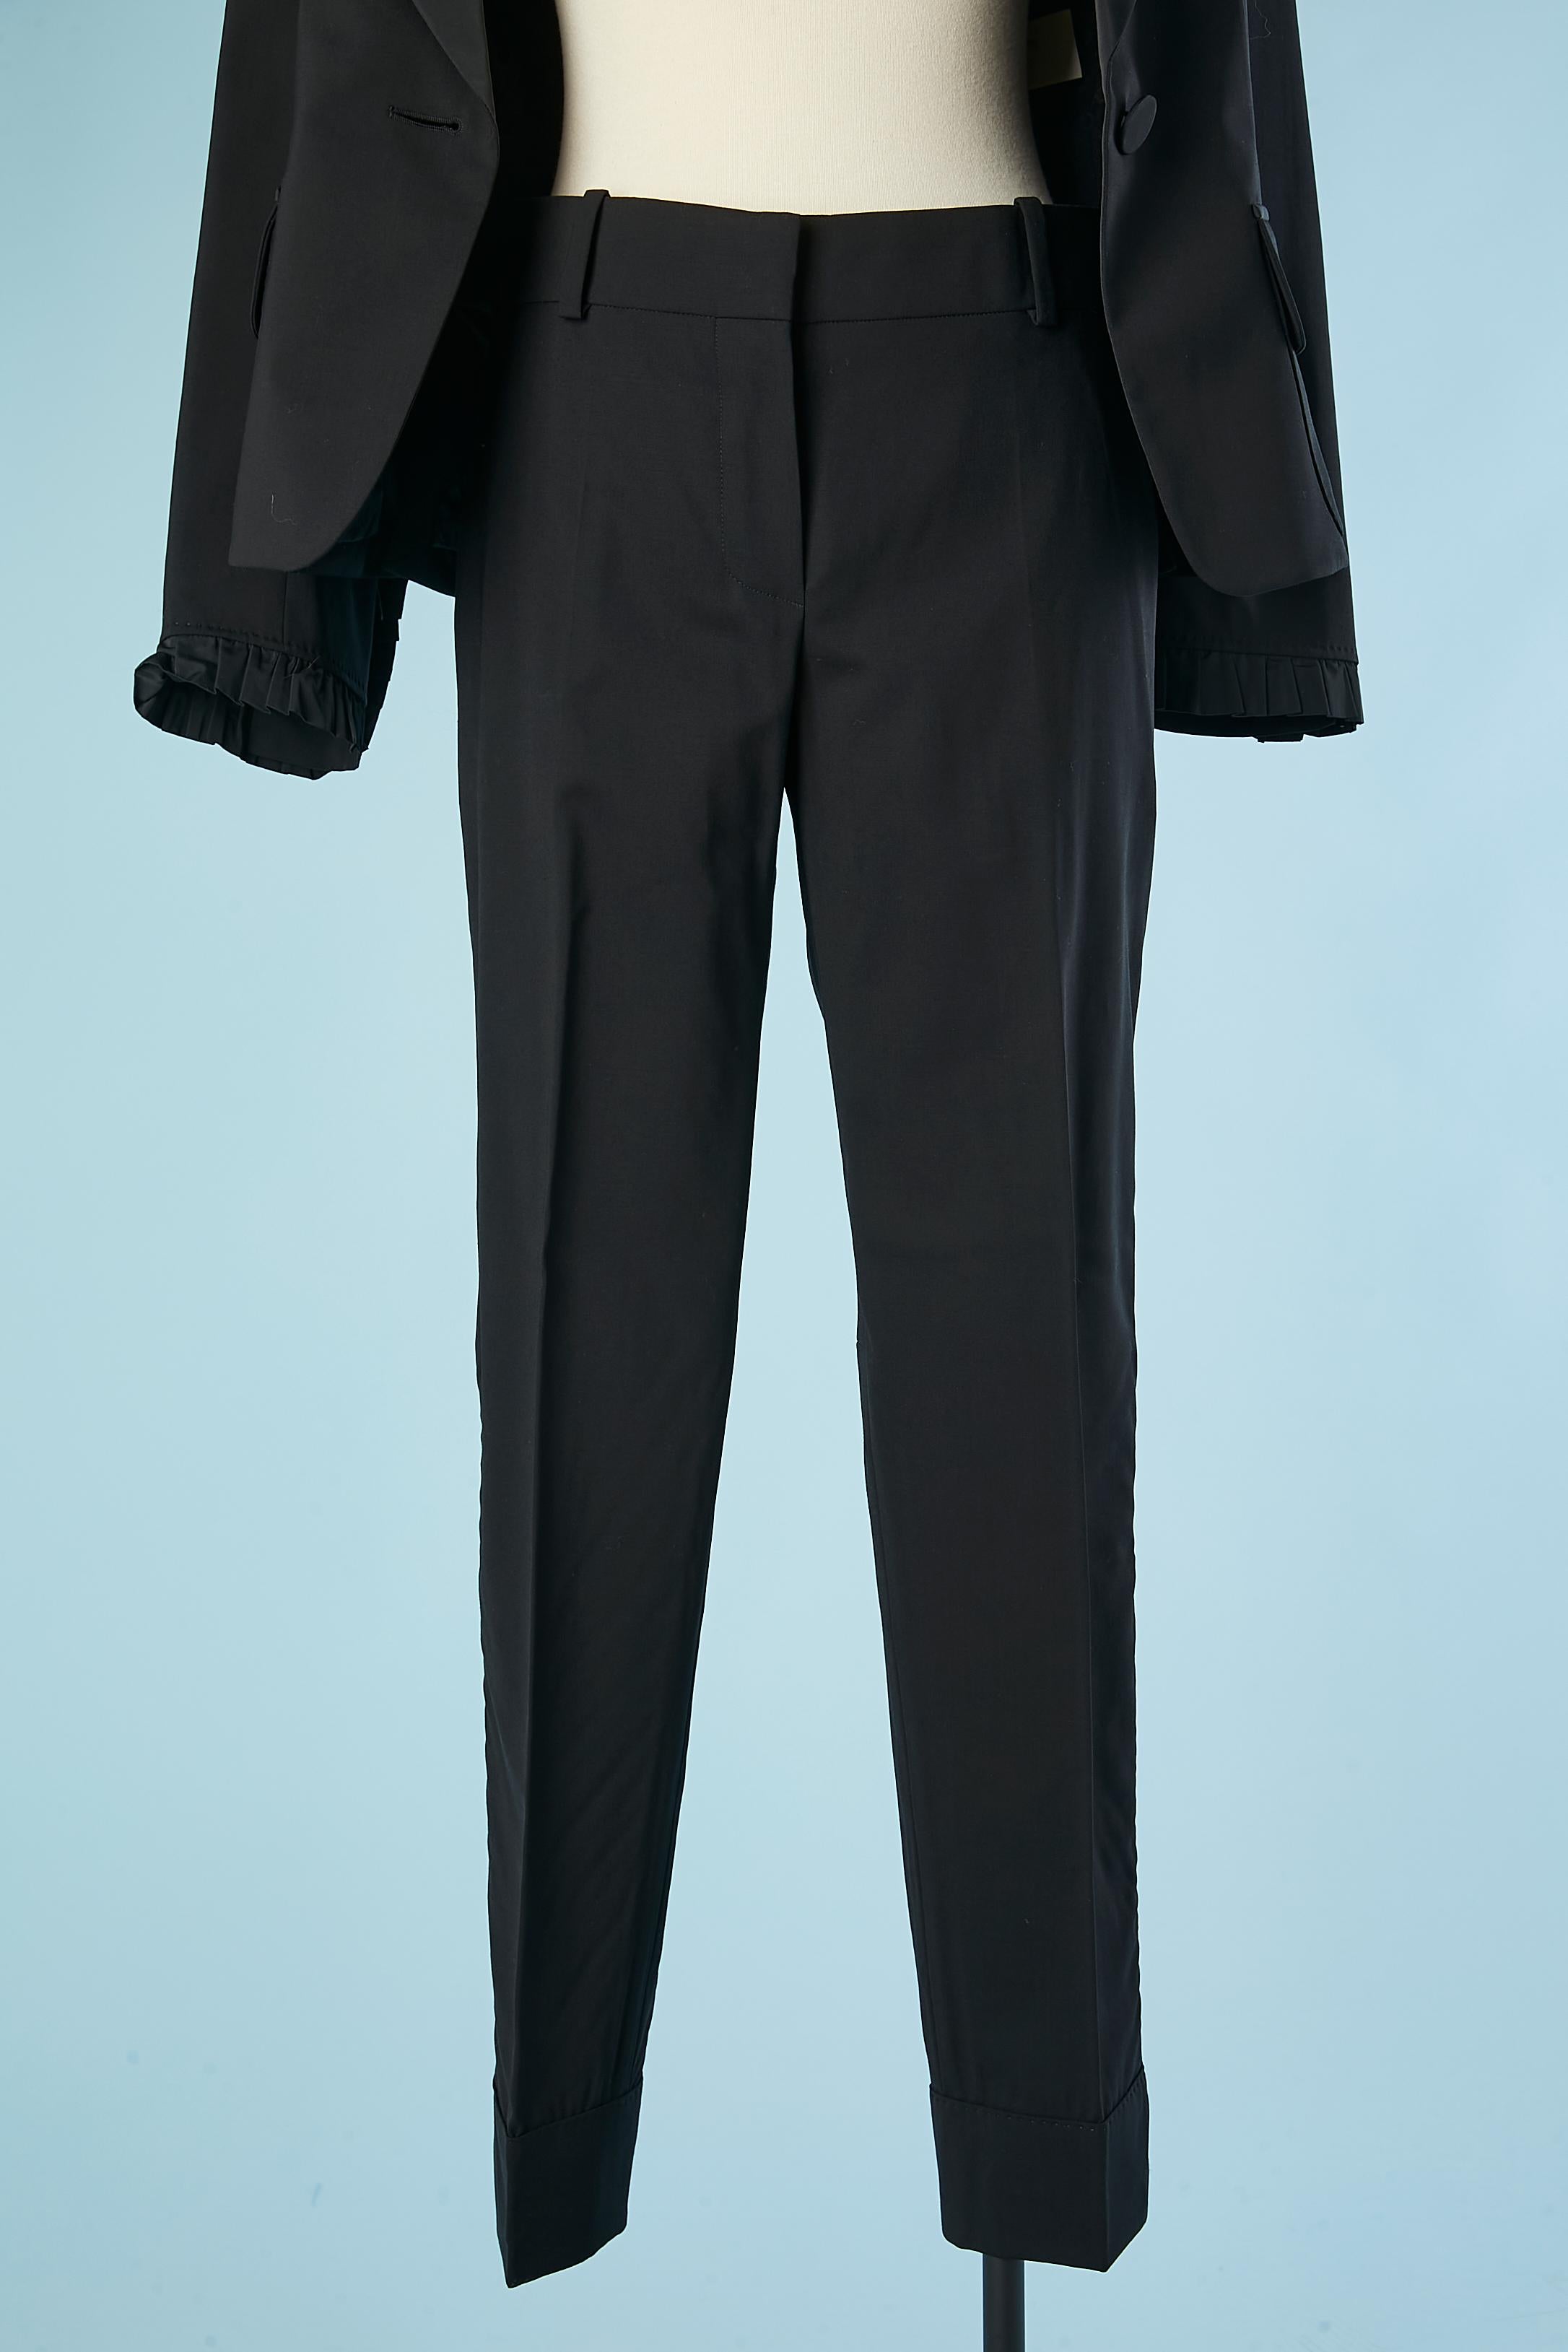 Women's or Men's Black single-breasted tuxedo with ruffle on the cuff Louis Vuitton by Marc Jacob For Sale